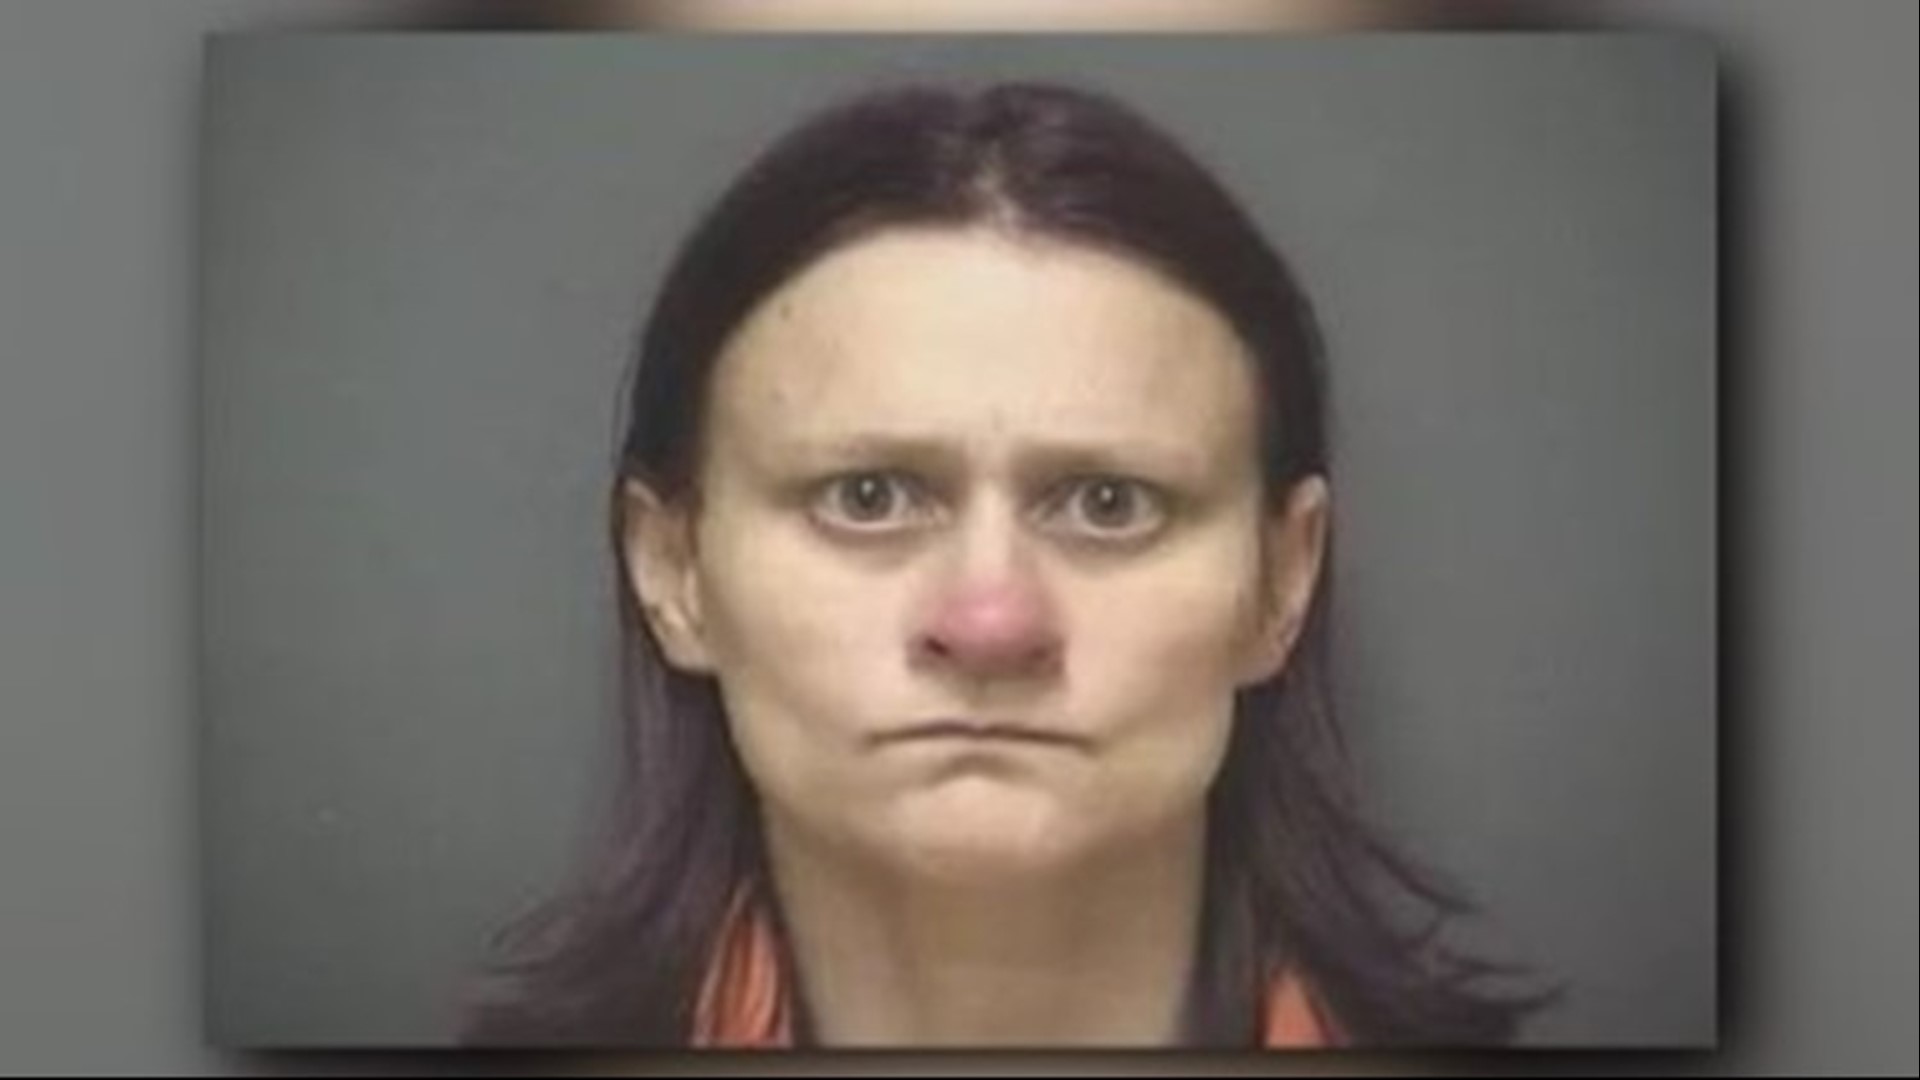 Amanda Gail Oakes of Murrayville, Georgia, waived her arraignment hearing on Monday and entered a not guilty plea in Houston County, Alabama, the Clerk of Courts Office confirmed.